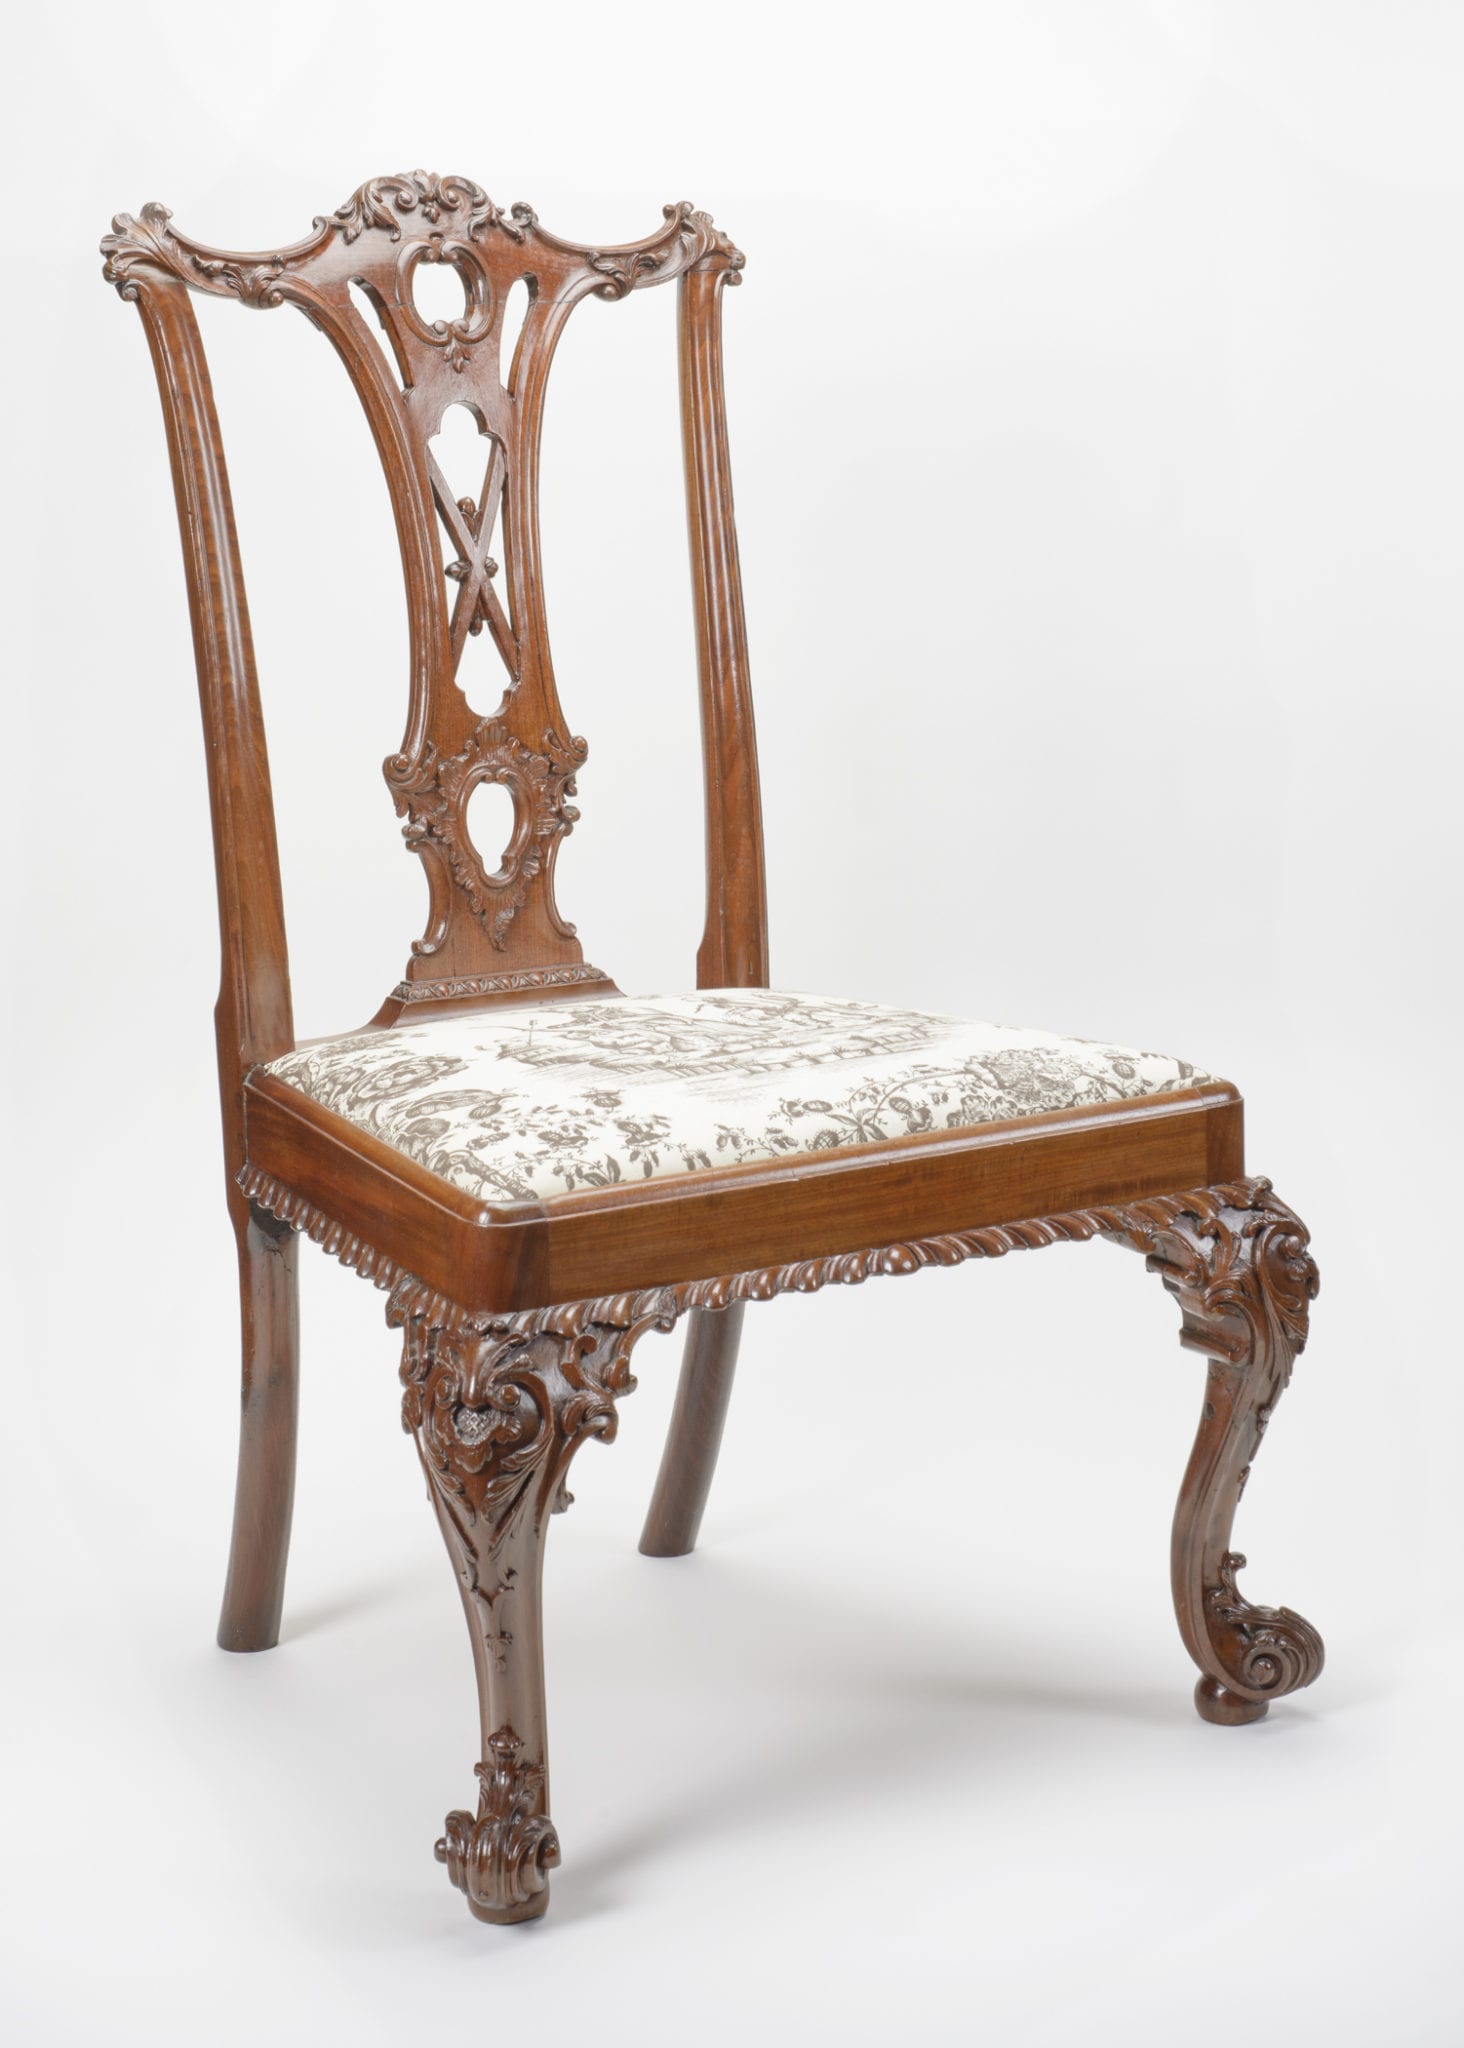 Thomas Chippendale At 300 Treasures From The Collection